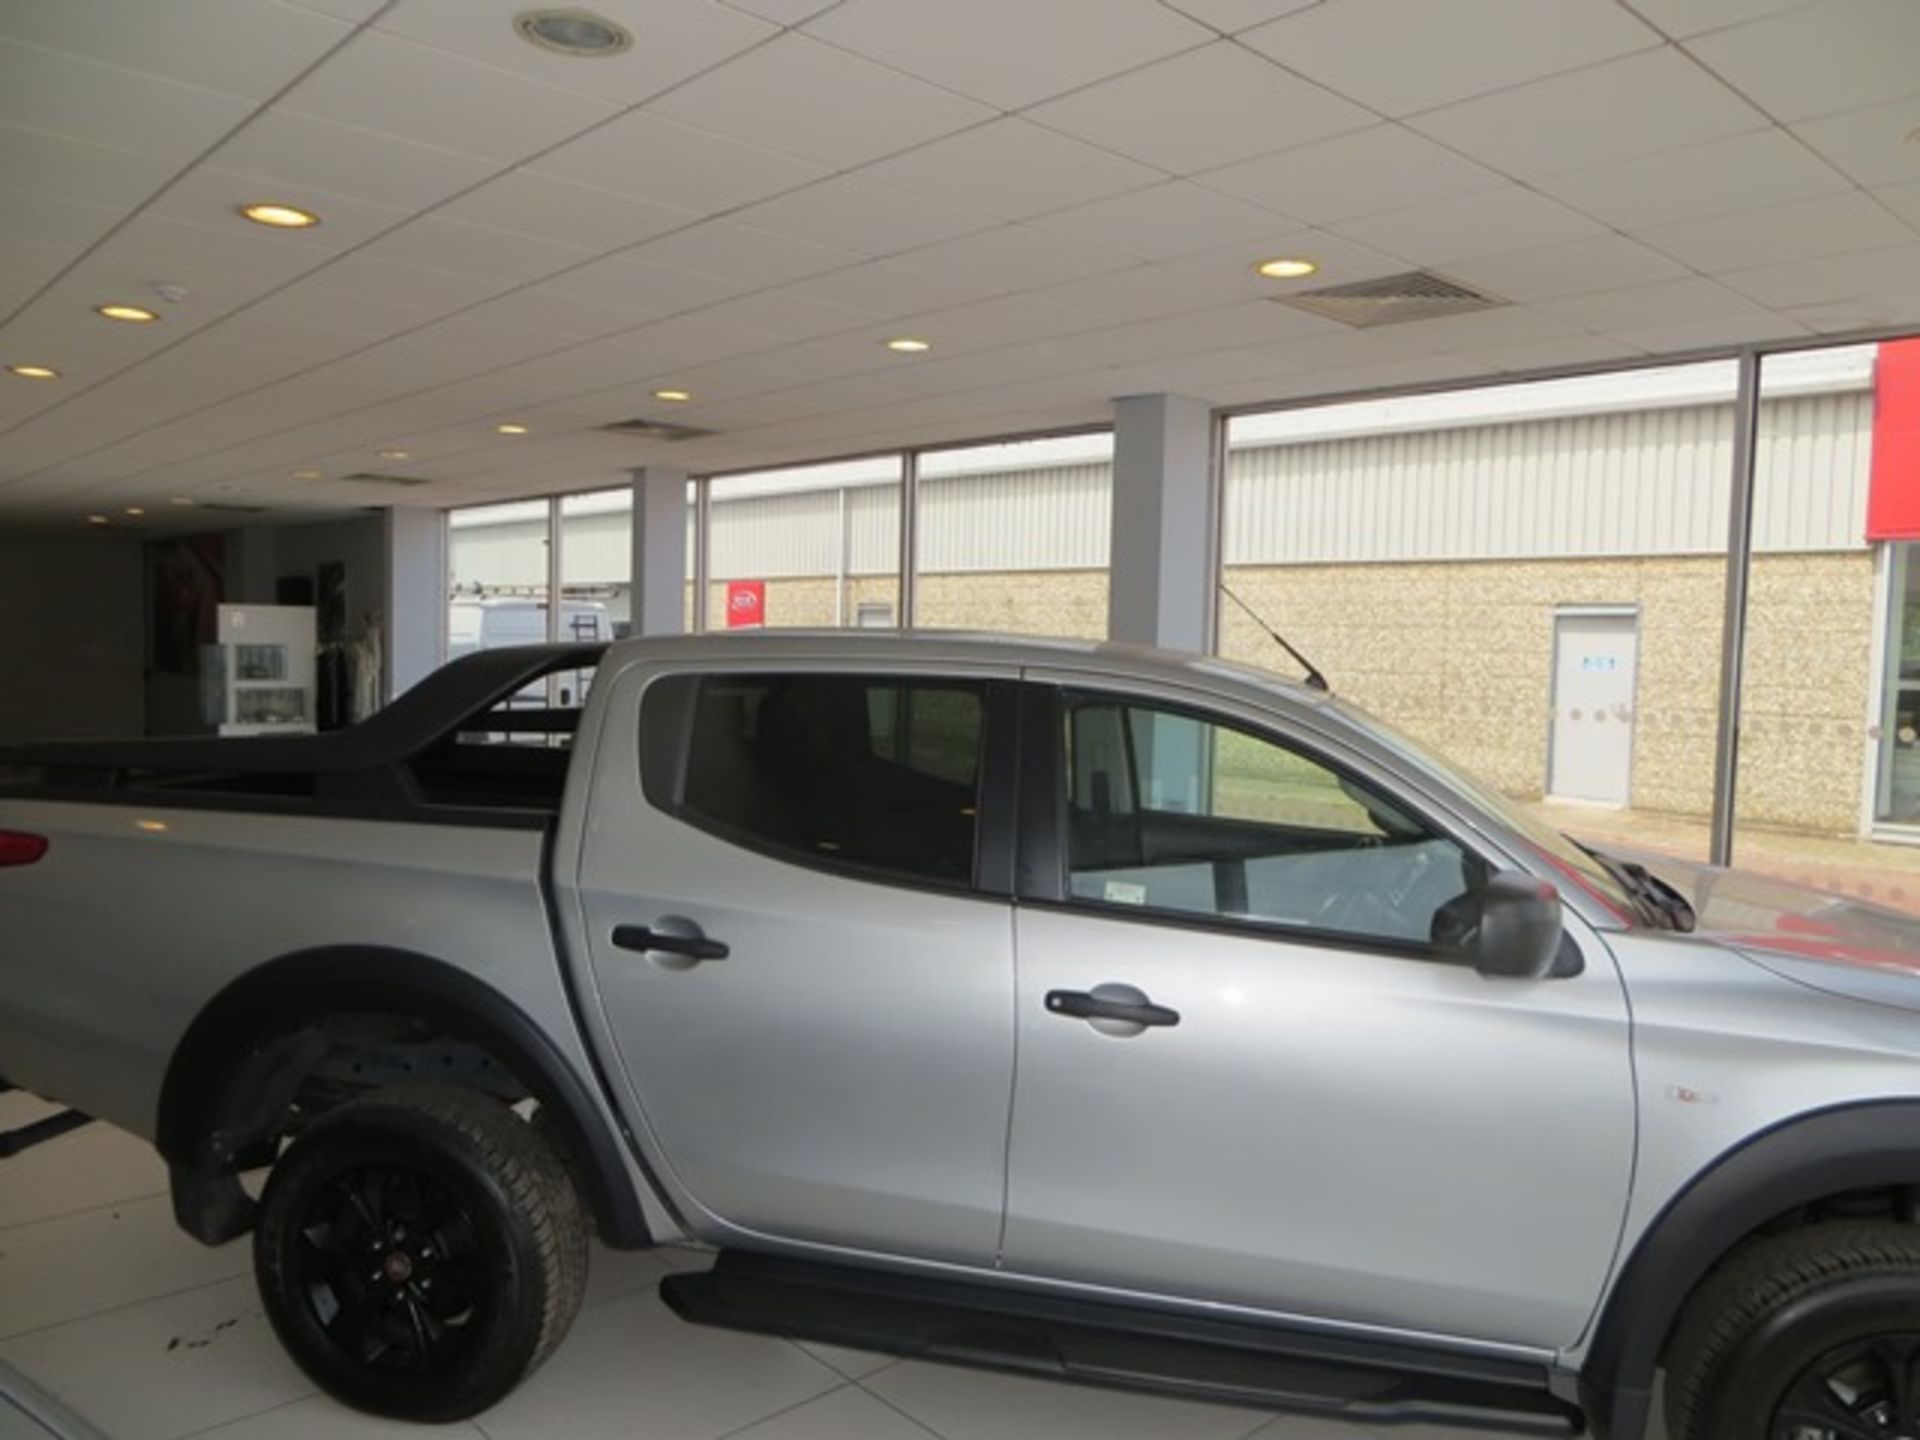 Fiat Full Back Cross 2.4 D Double Cab diesel pick up 4X4 Metallic Silver 'Leather interior 17 inch - Image 6 of 10